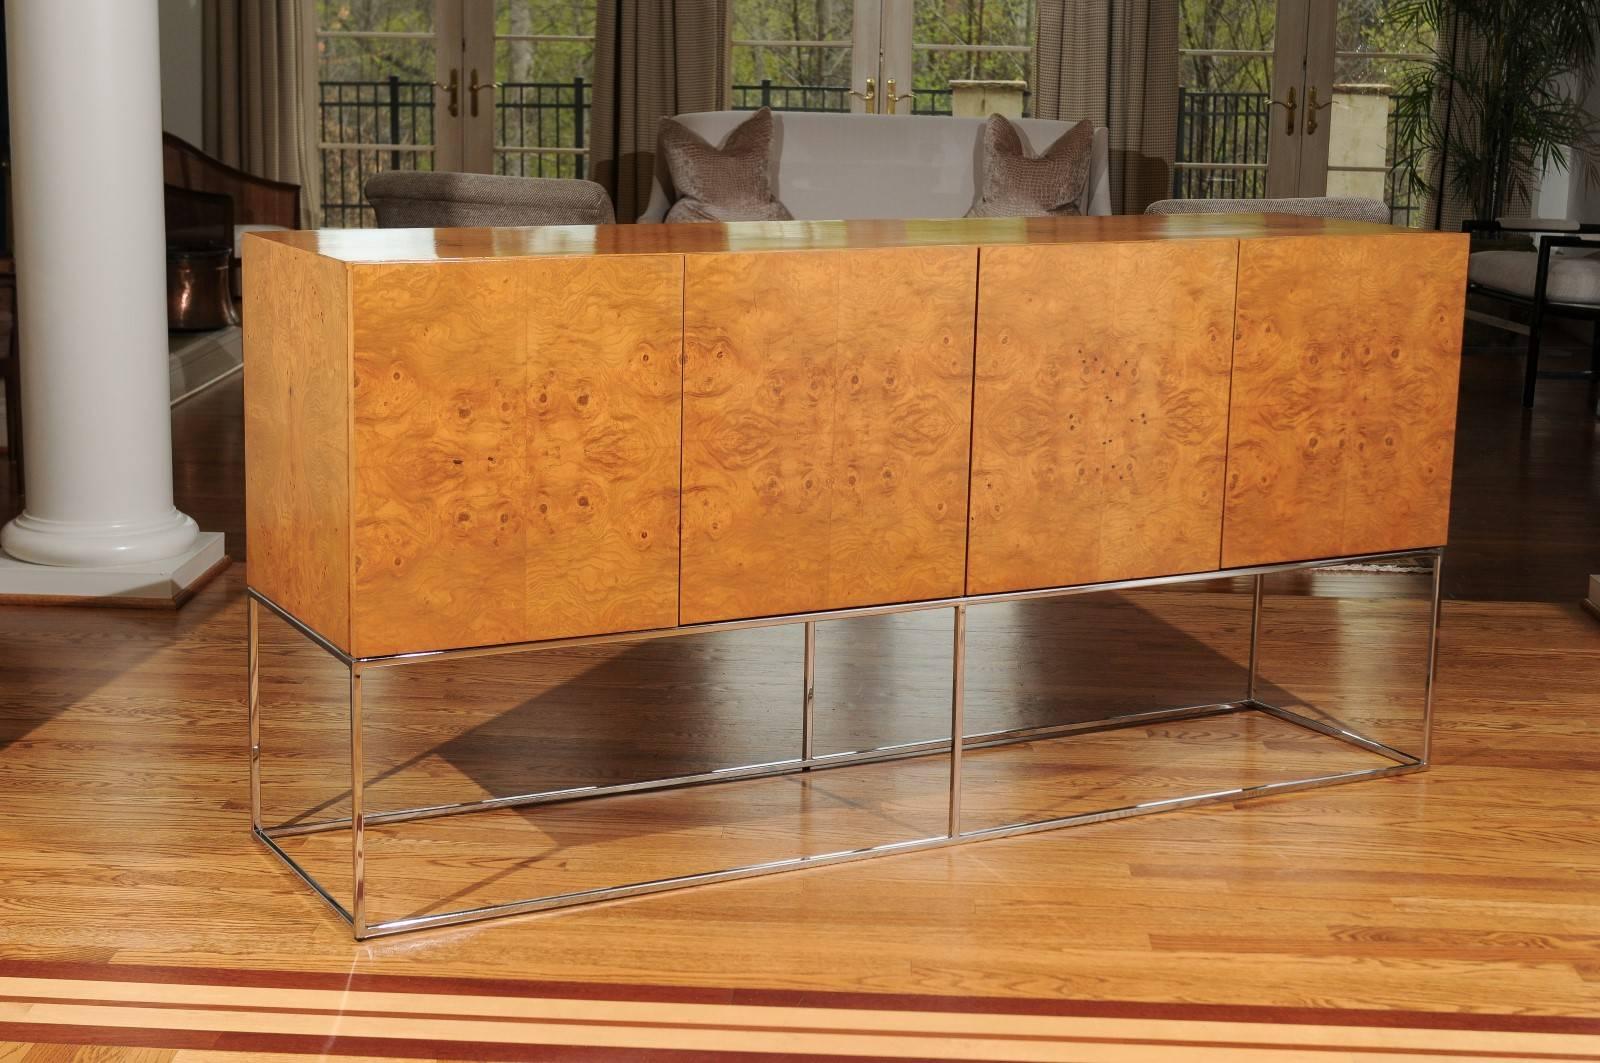 This magnificent cabinet is shipped as professionally photographed and described in the listing narrative: Meticulously professionally restored and completely installation ready.

A stellar buffet or credenza by Milo Baughman for Thayer Coggin,